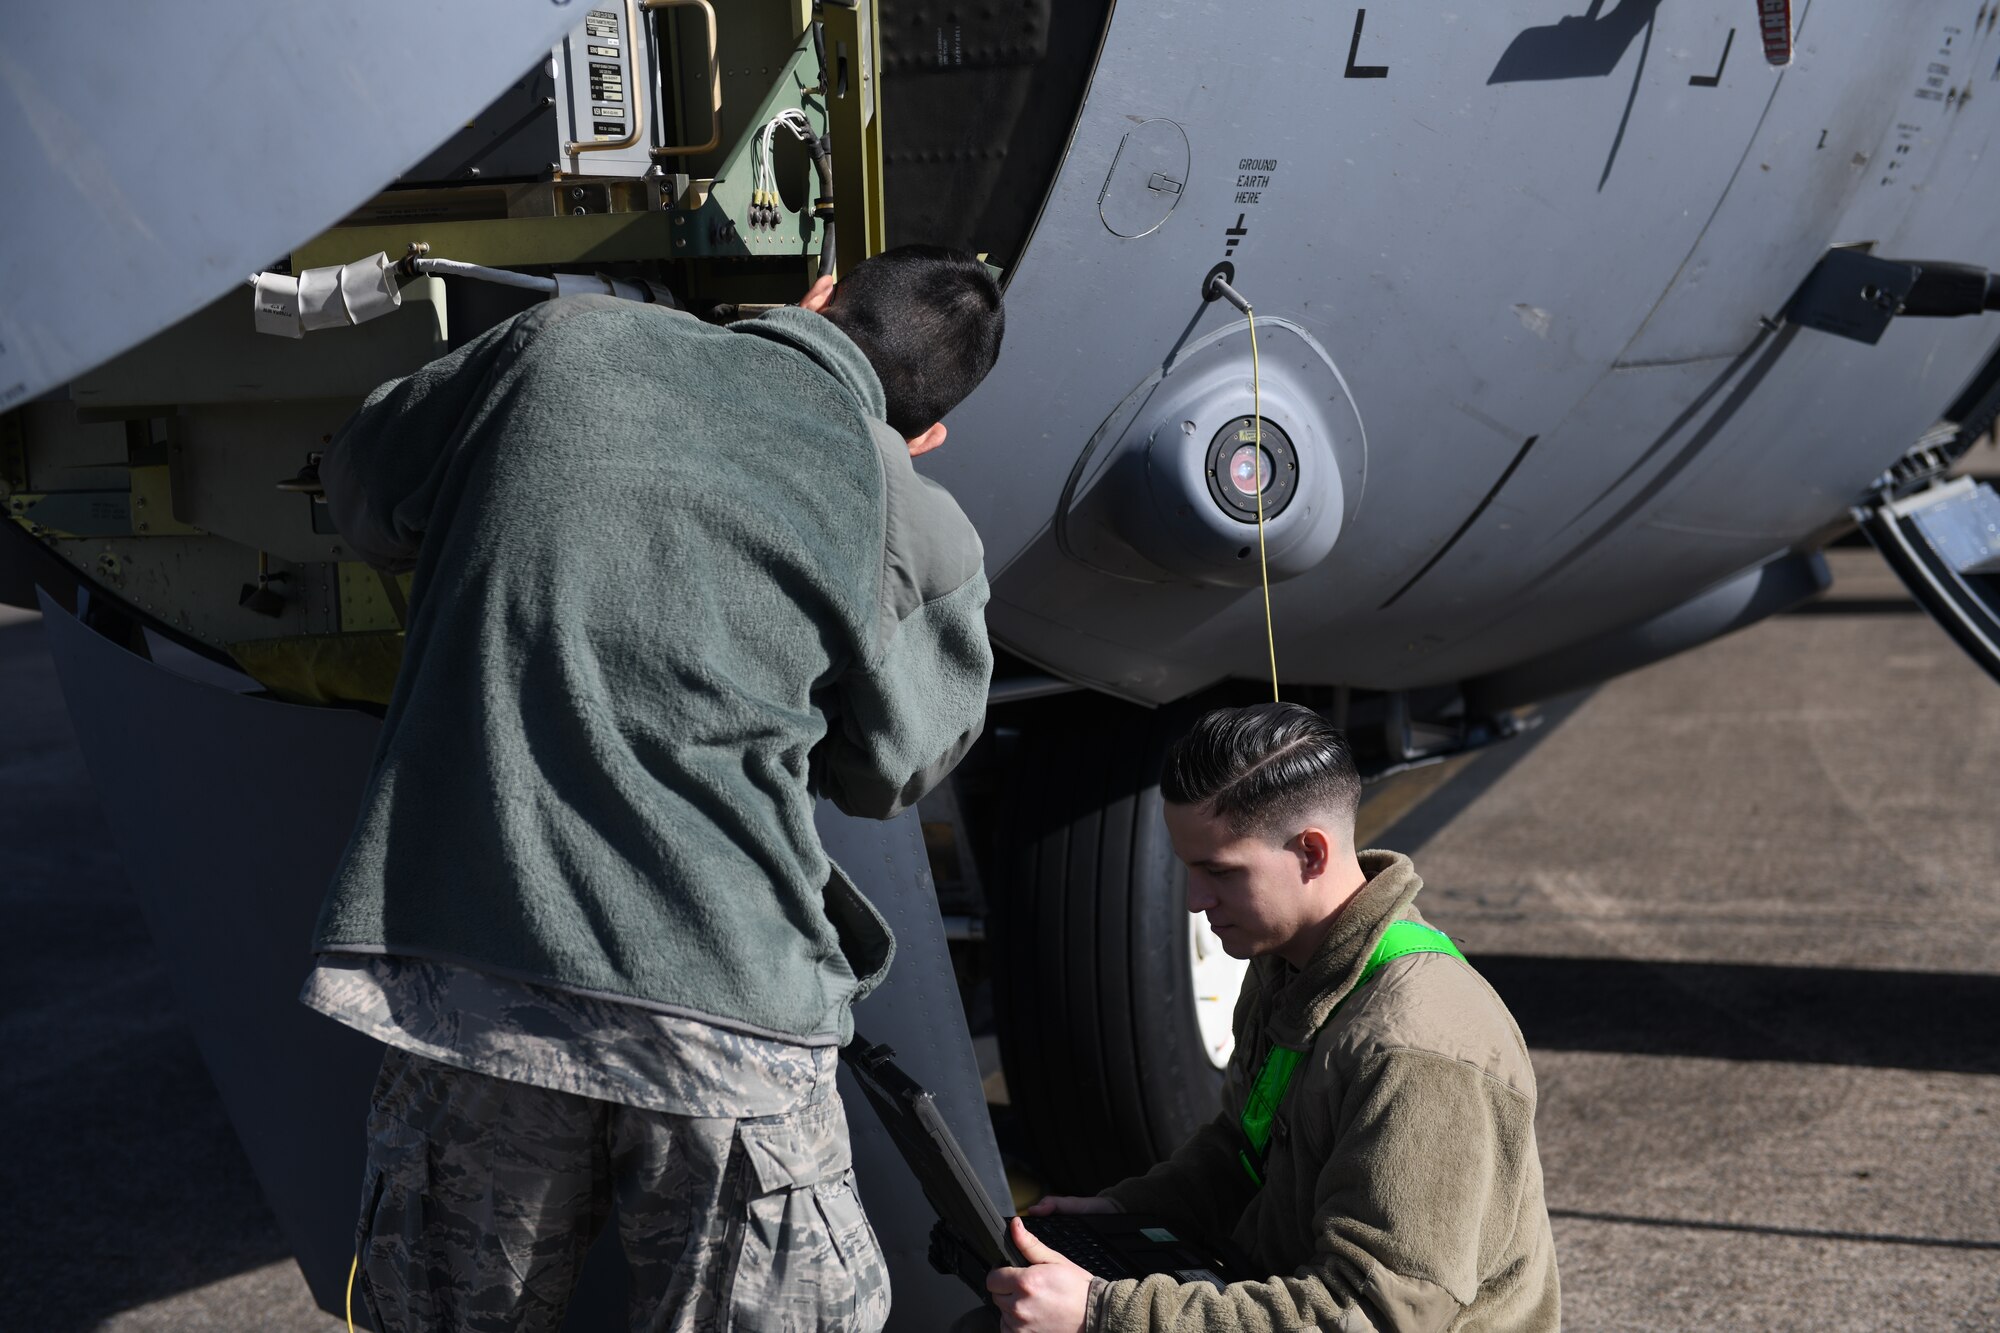 An Airman looks at a computer as another Airman fixes a part of a C-130J Super Hercules.